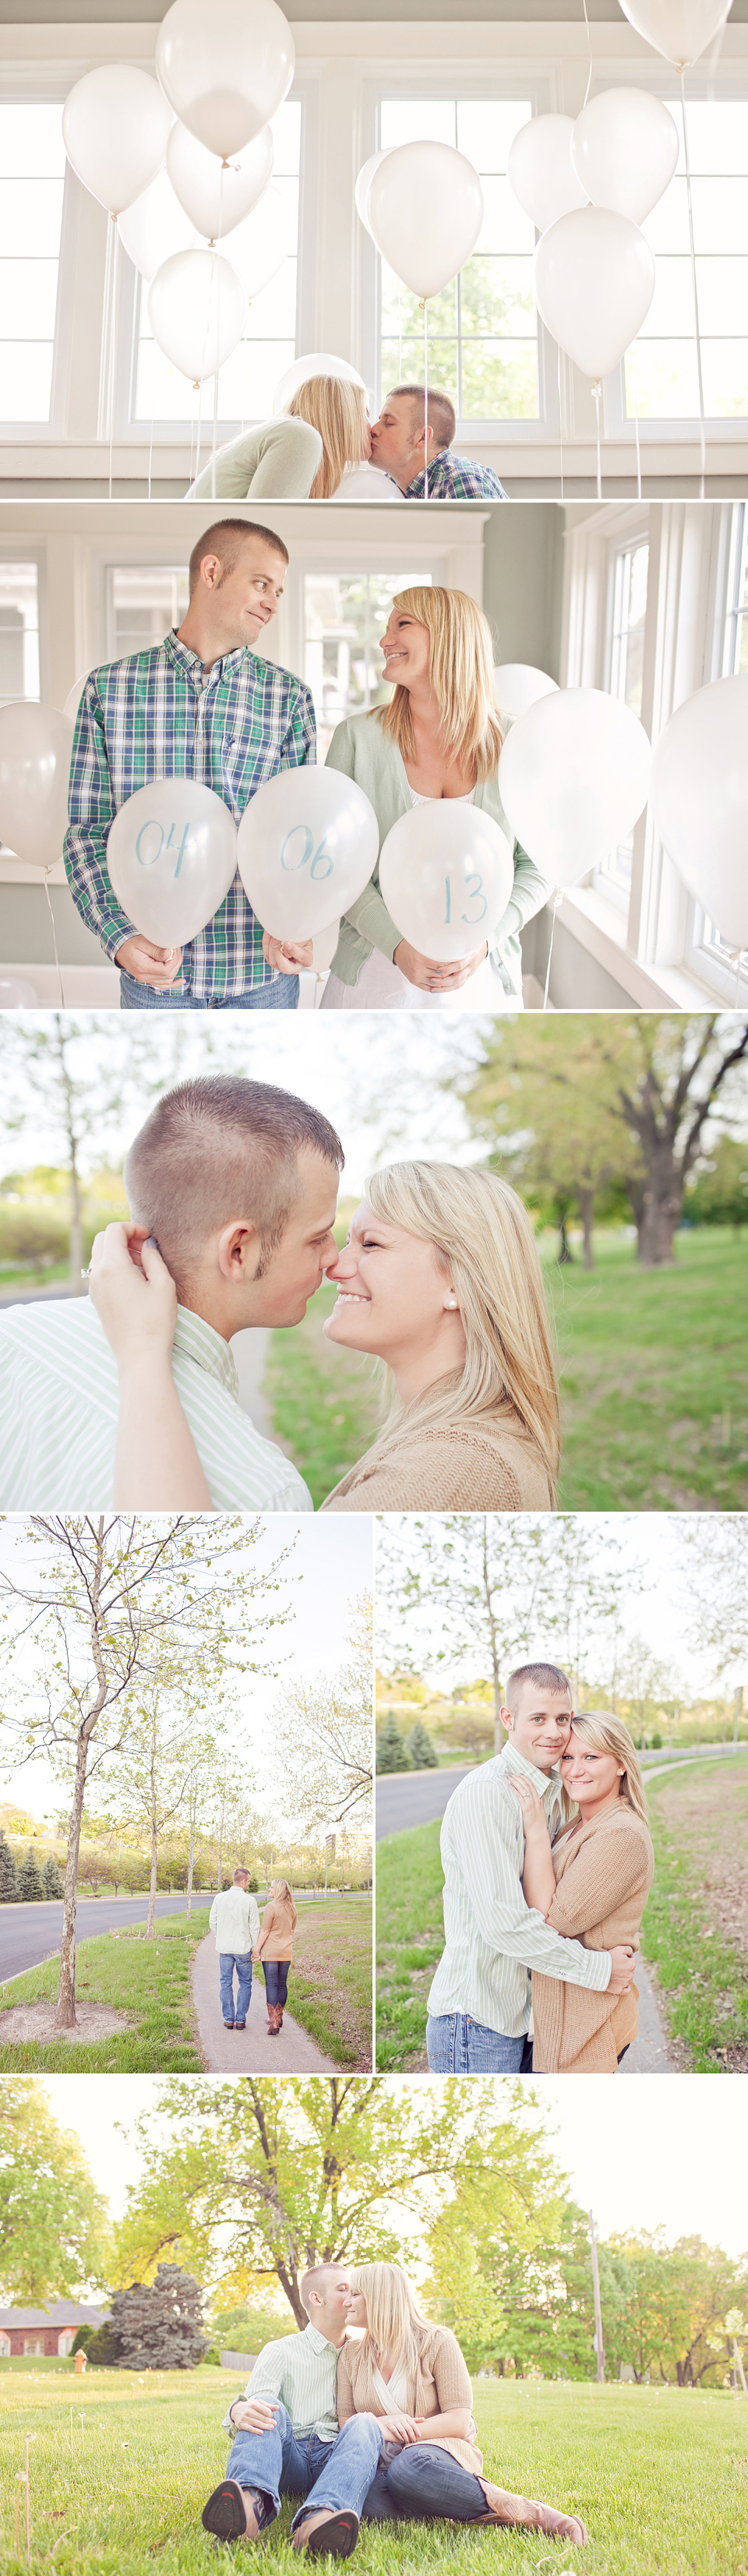 Couples, Beloved sessions, Jana Marie, Save the date, Kisses, laughter, Kc portraits, parks, sun flare, spring